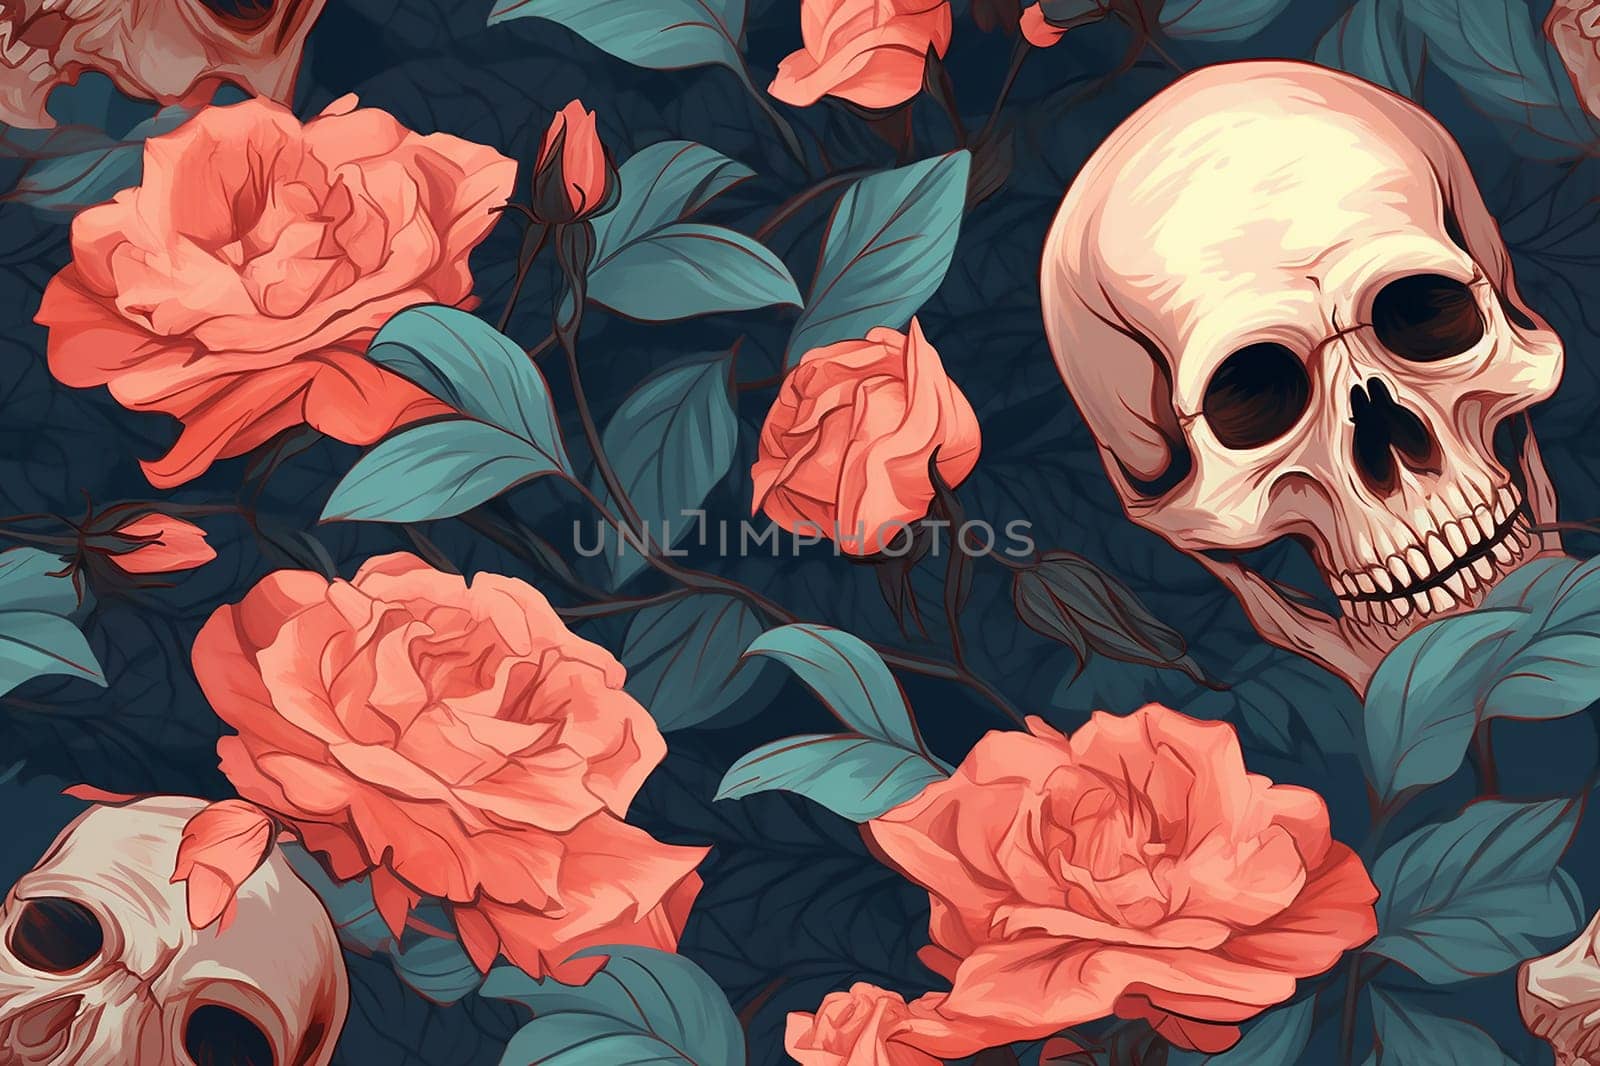 Gothic Floral pattern: Blooming Roses Amidst Dark Skull